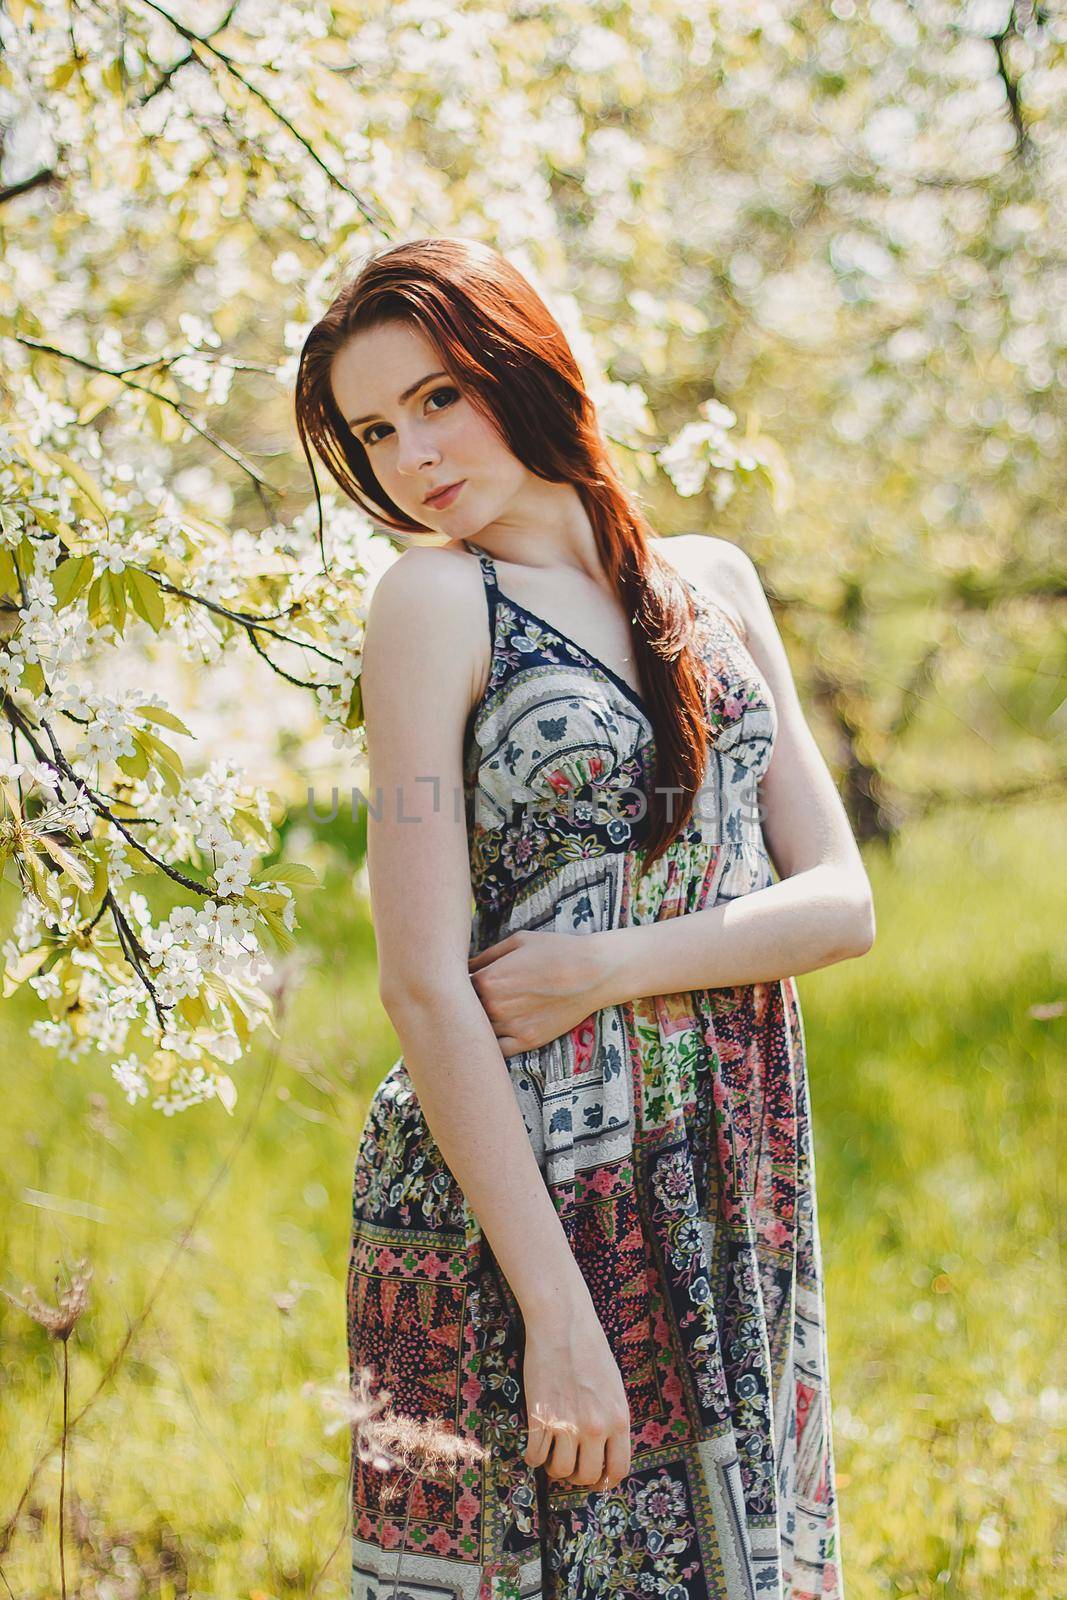 Portrait of carefree young woman in boho style dress in spring cherry blossom garden by mmp1206